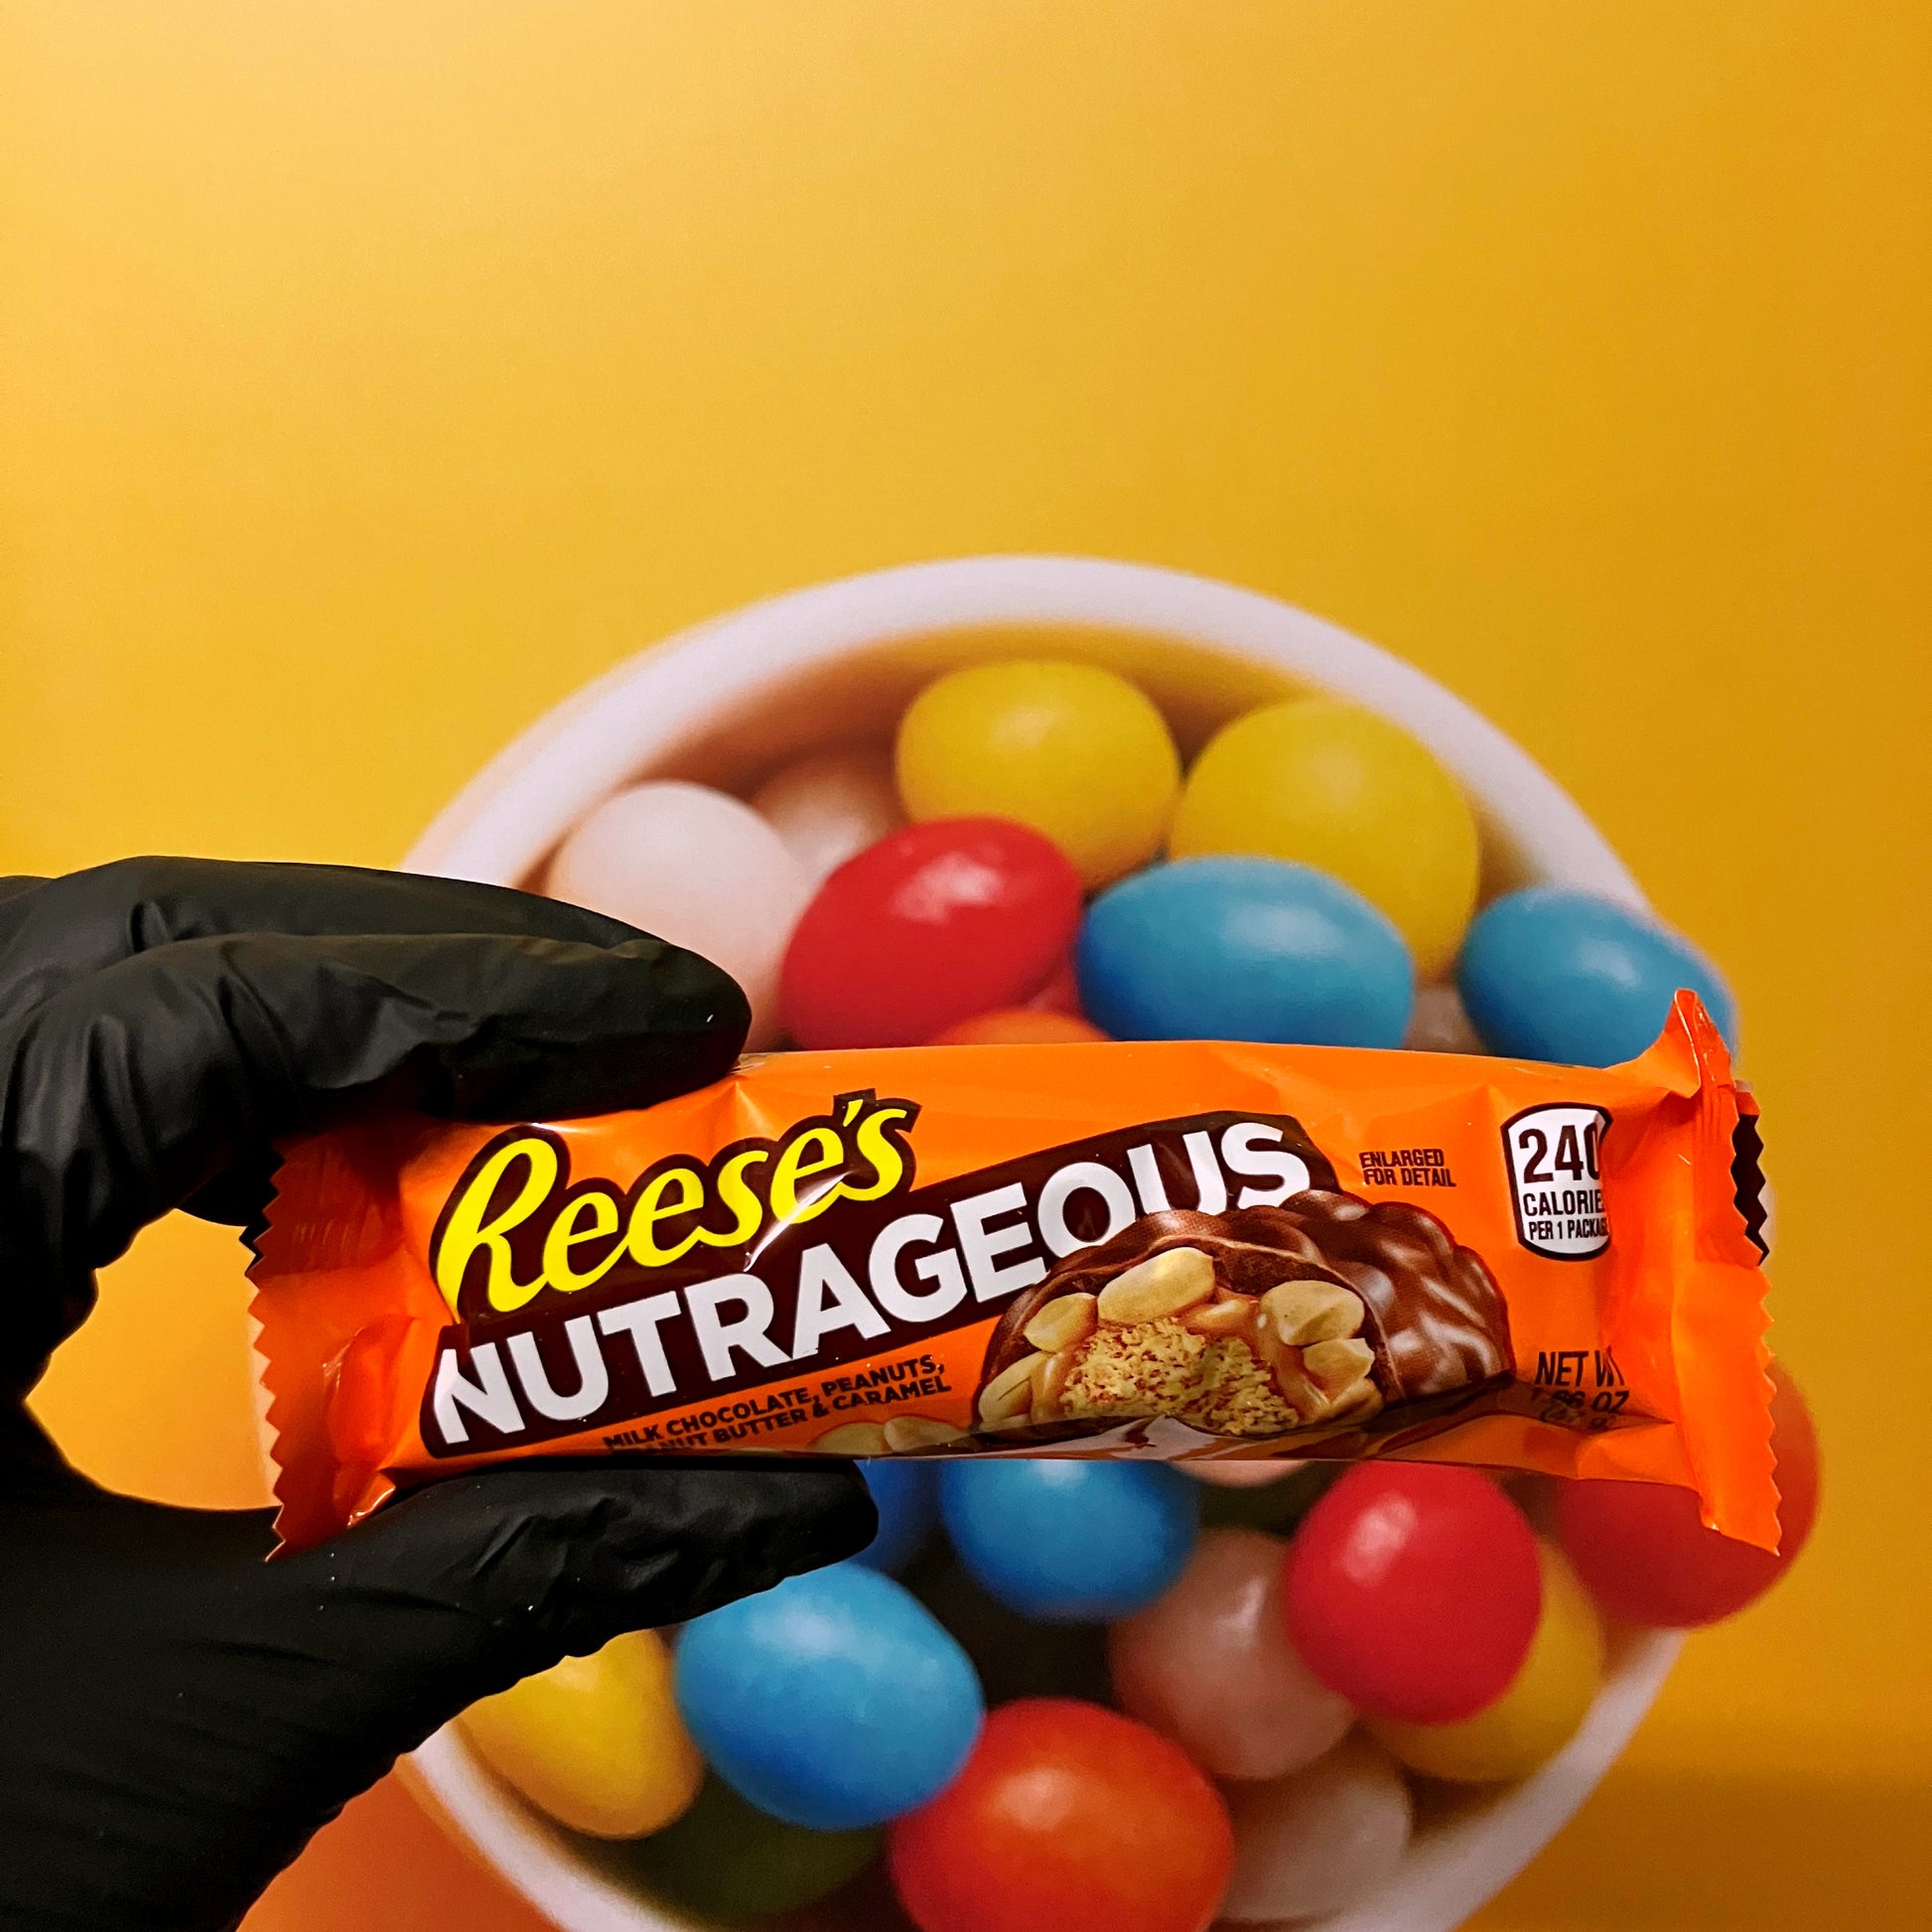 Reese's Nutrageous 47g Reese's